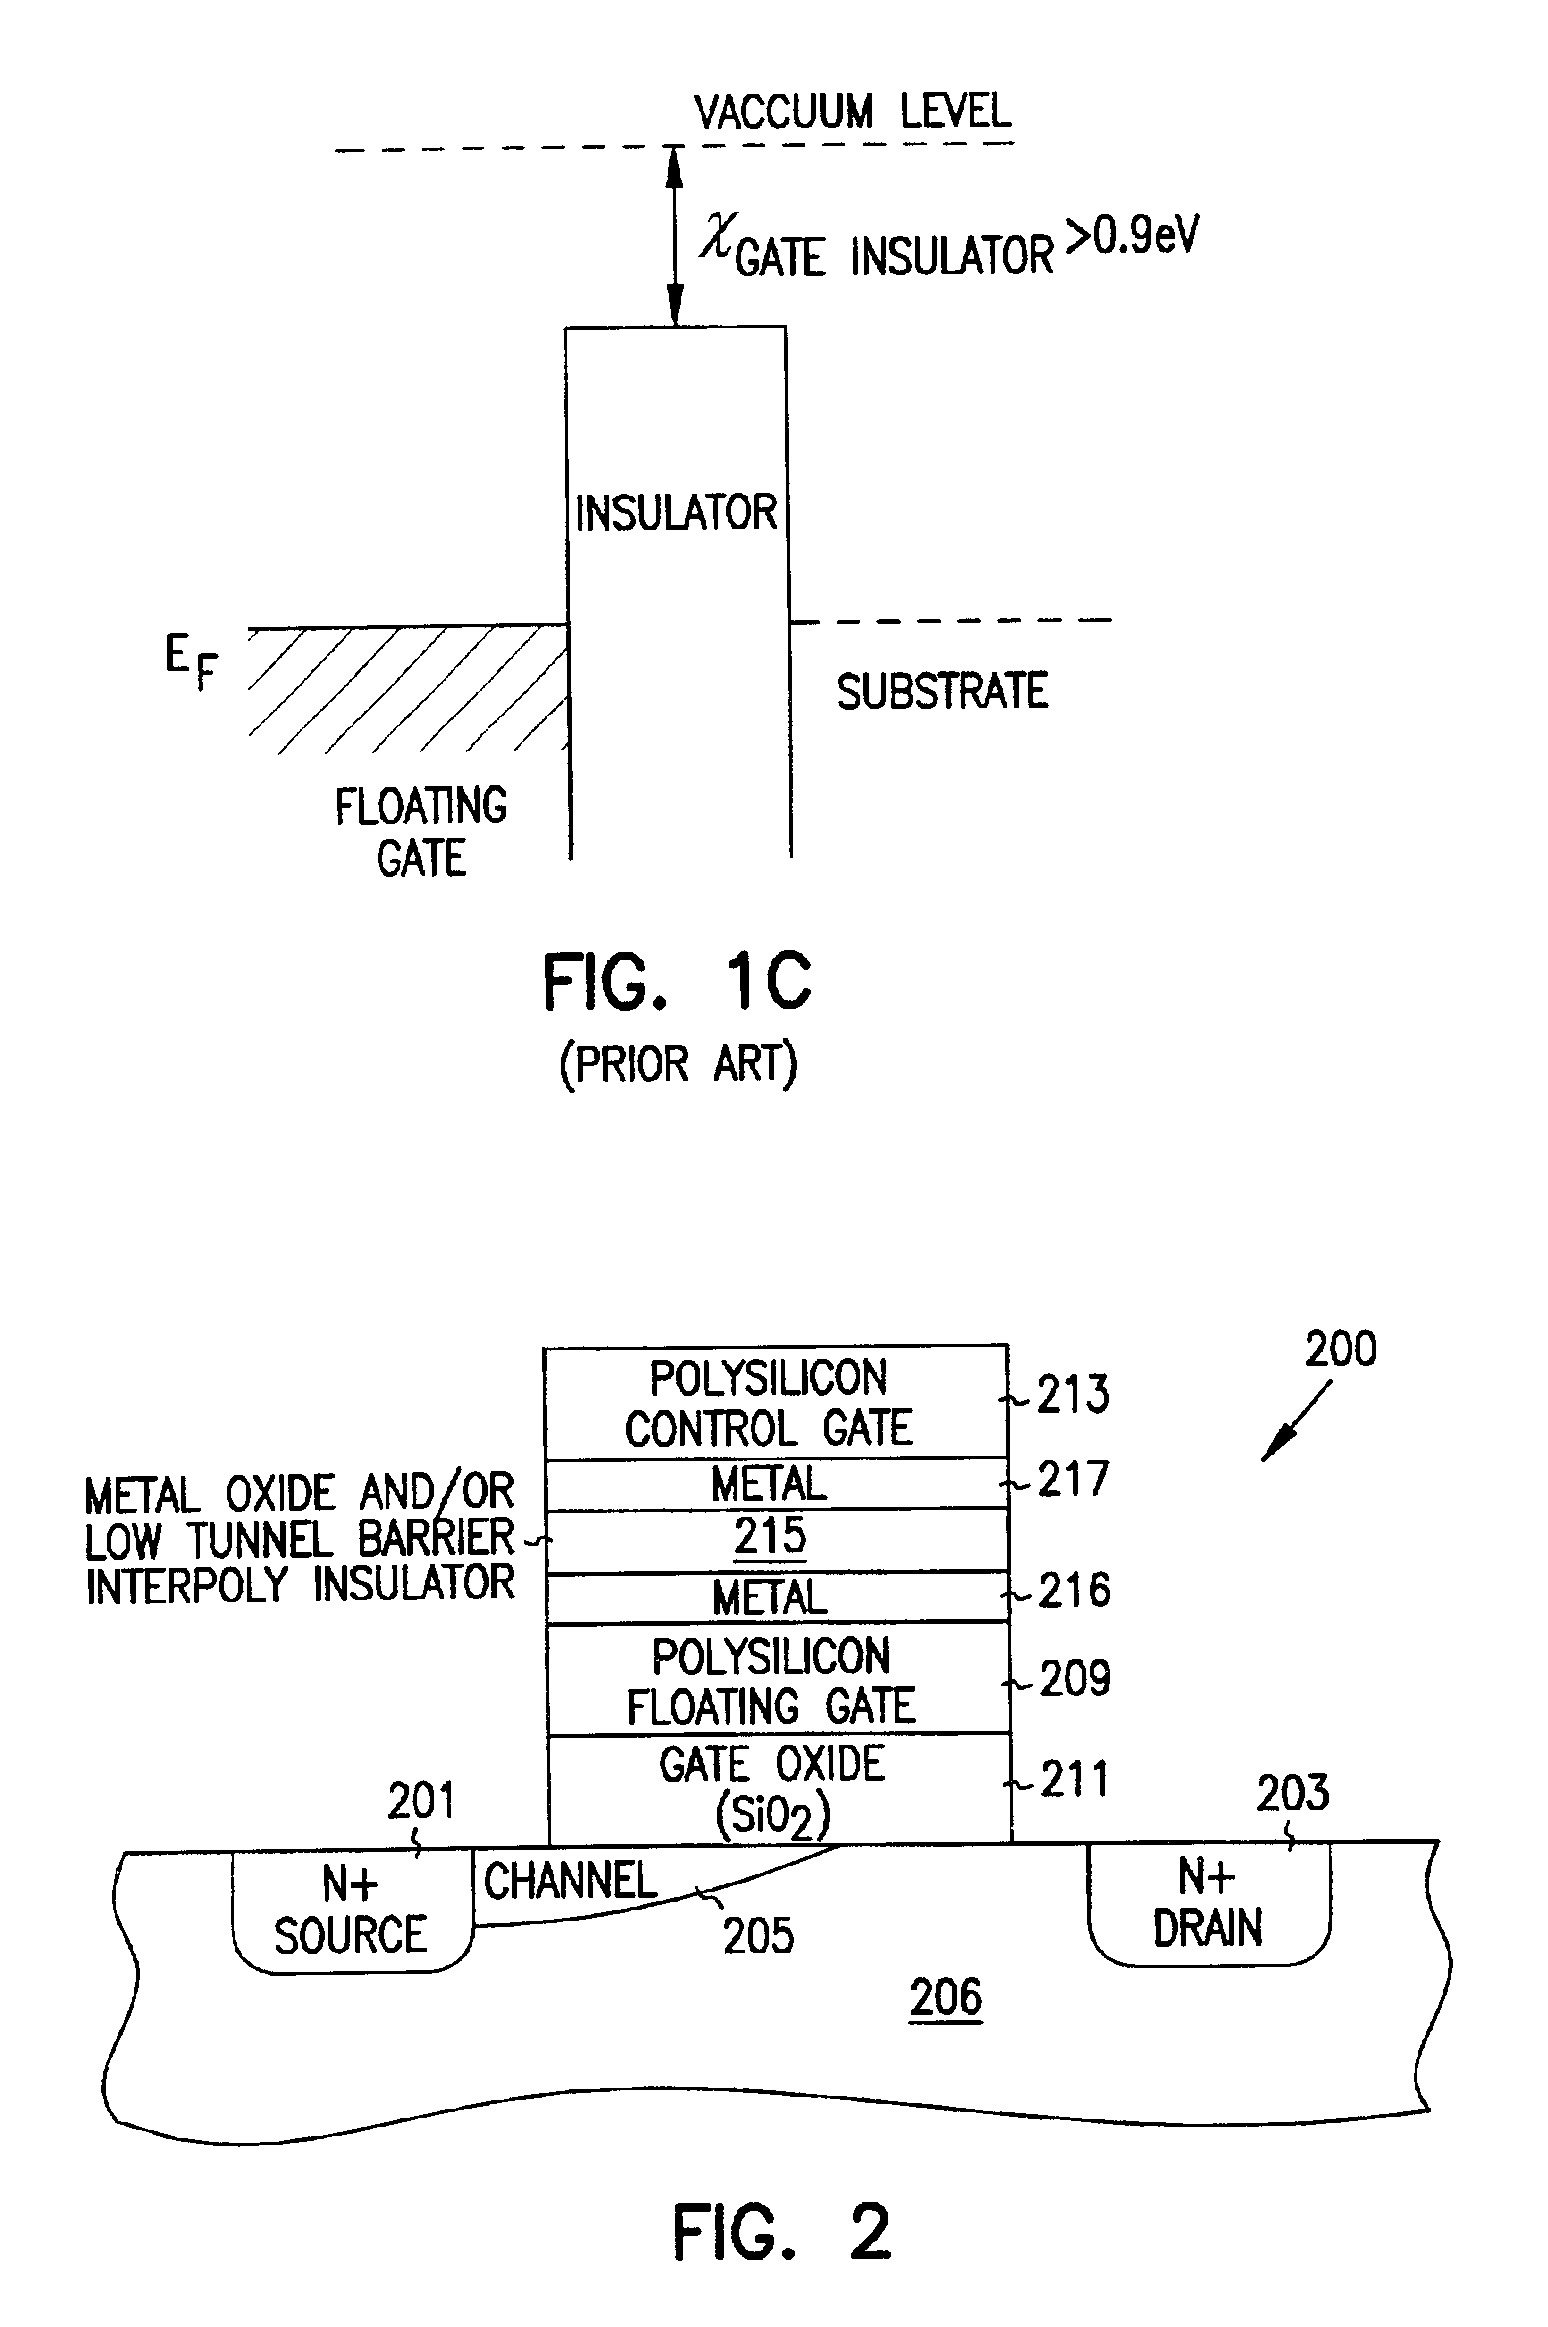 Flash memory with low tunnel barrier interpoly insulators